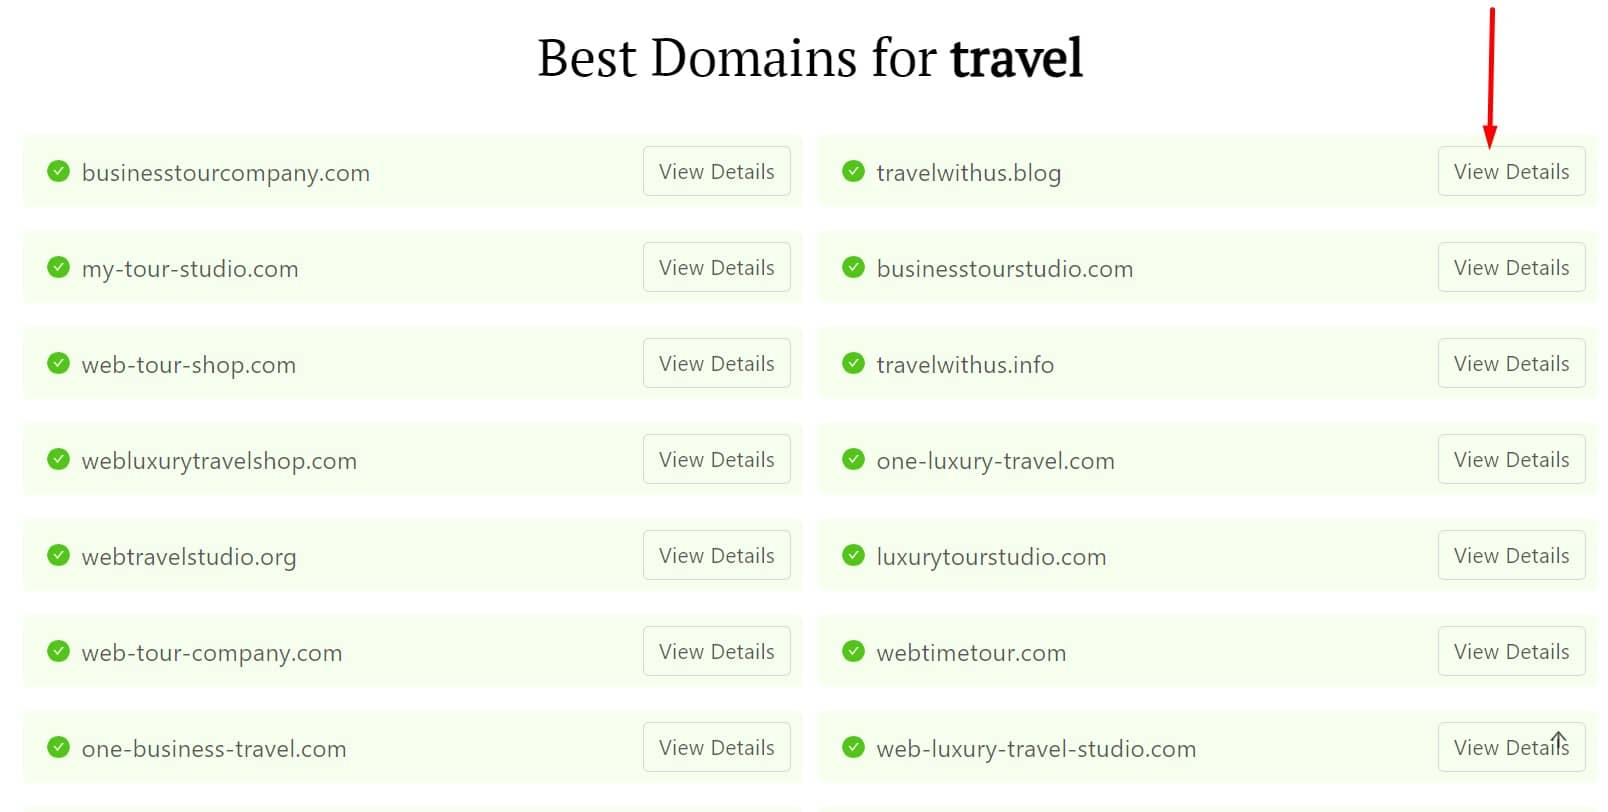 View Details for "travel" search